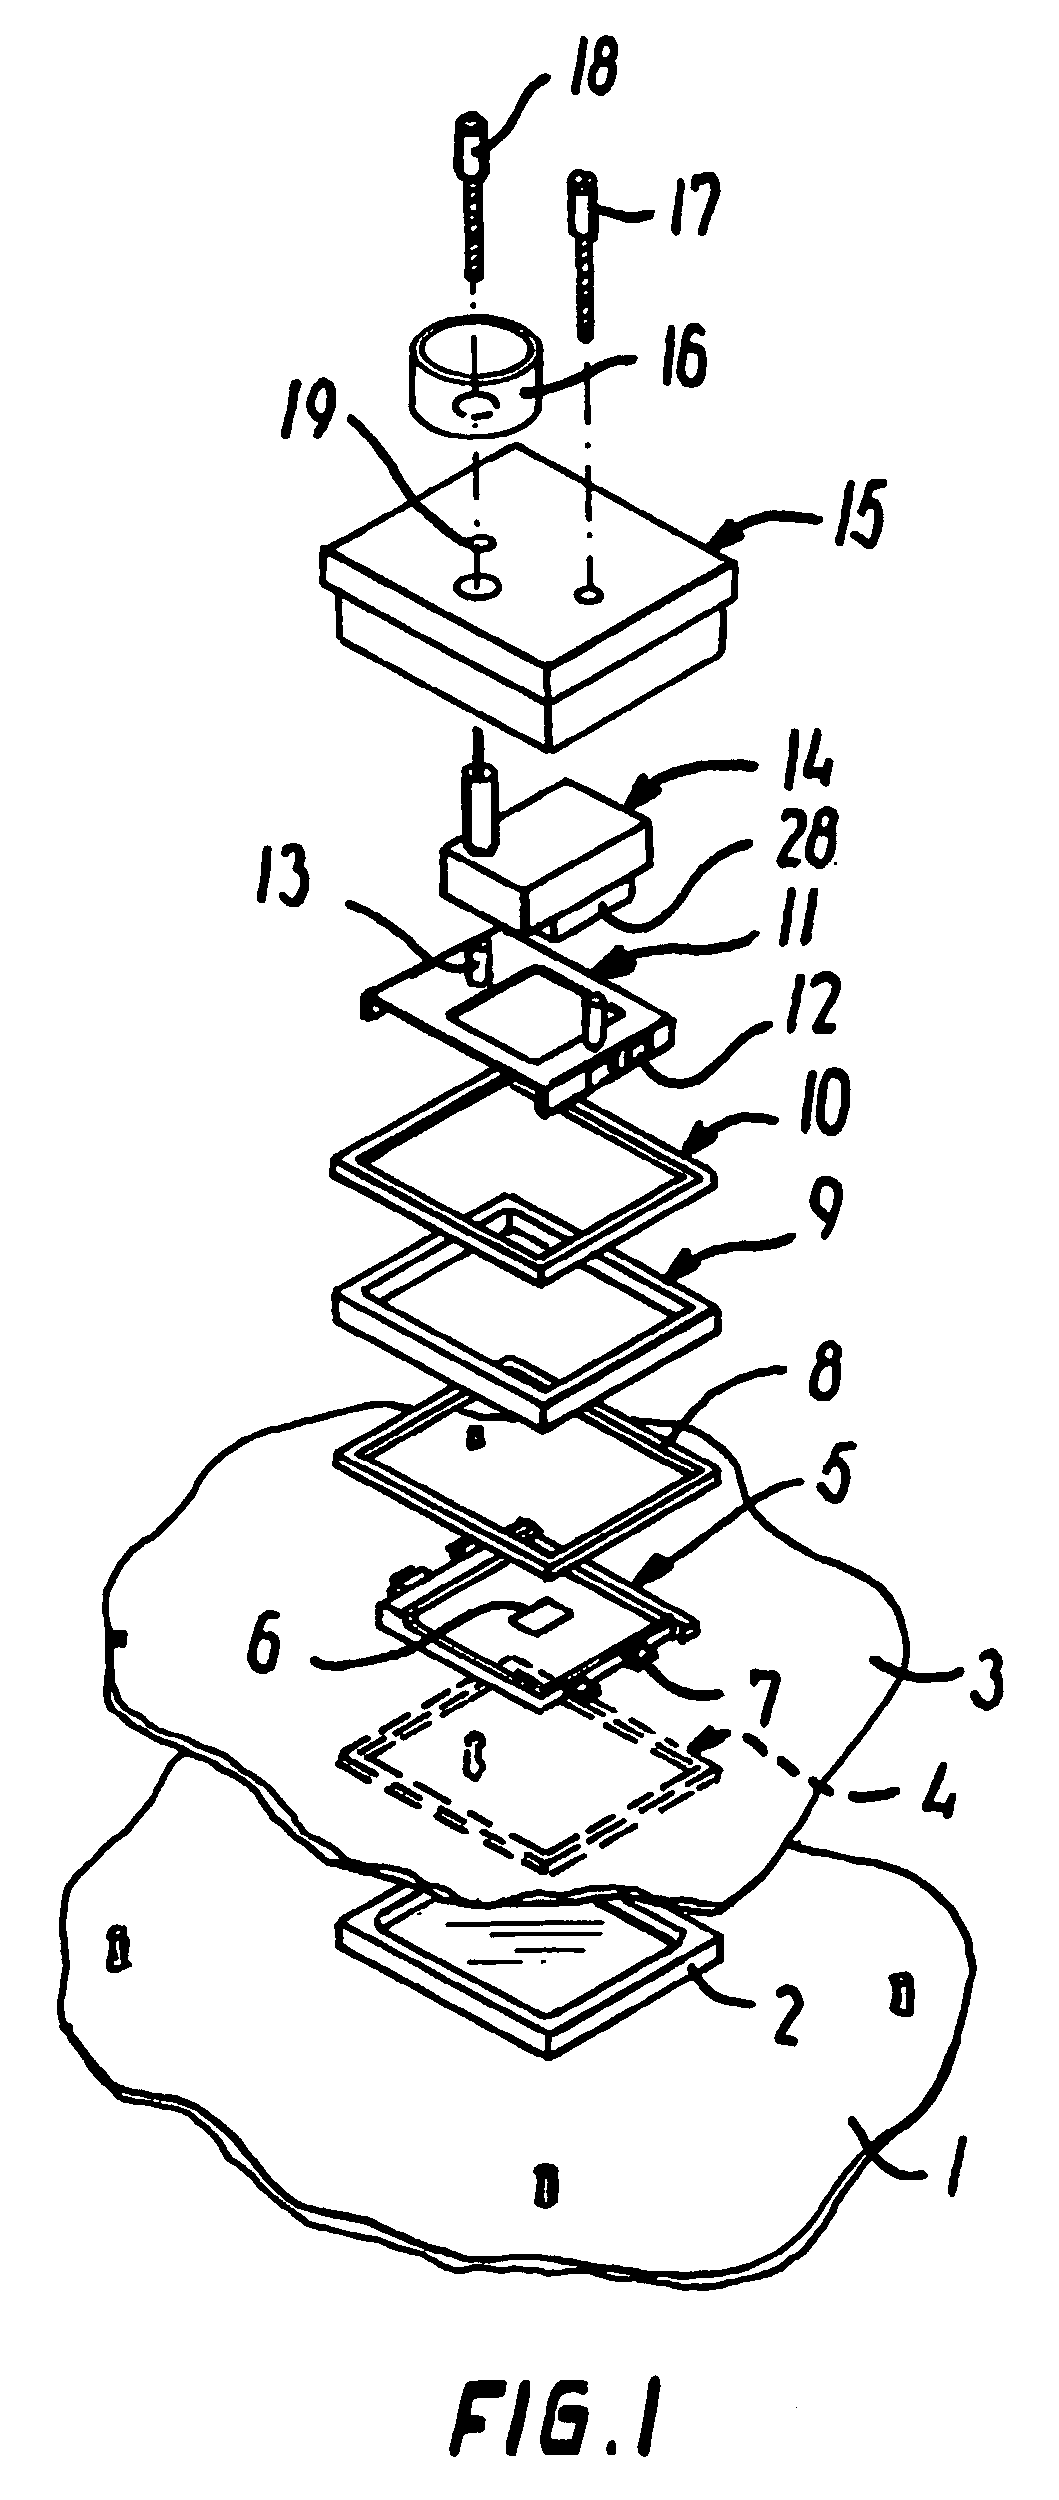 Cooling arrangement for an integrated circuit